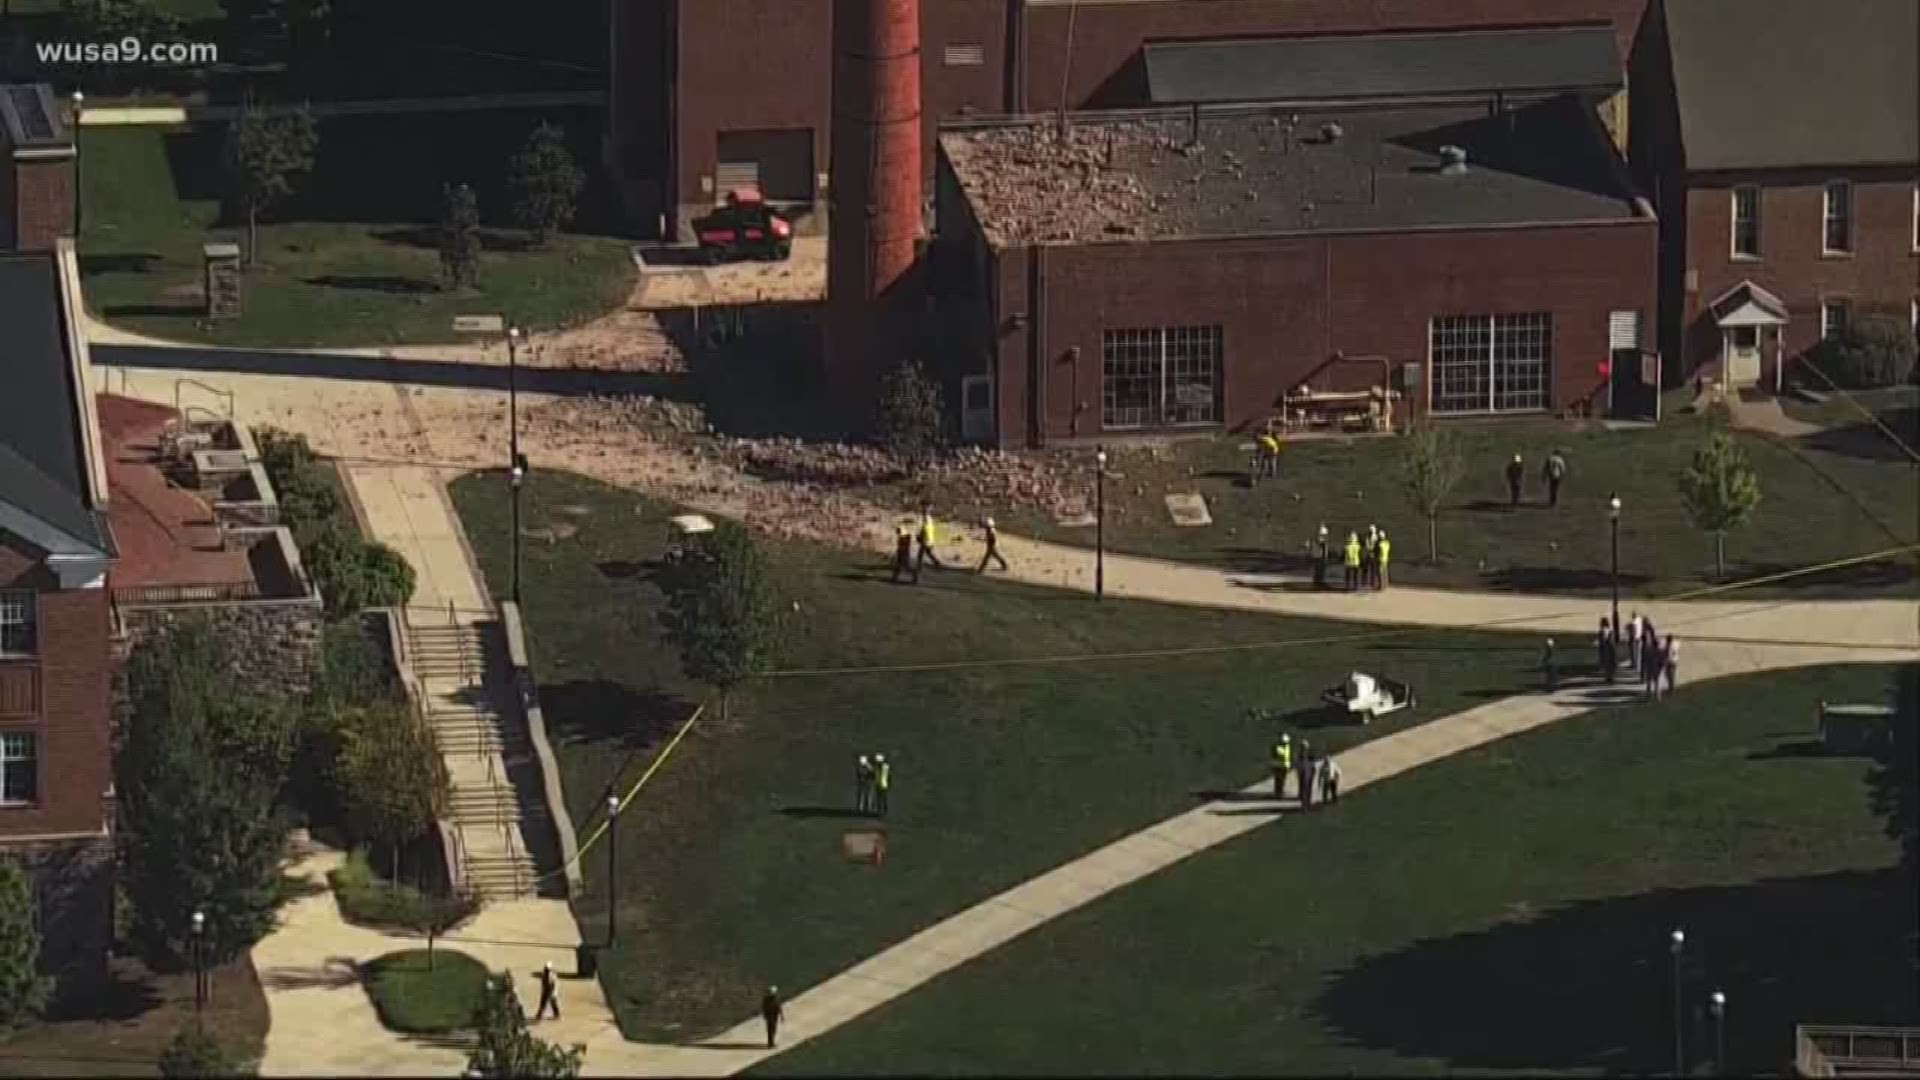 Two adults and one child were injured after an explosion at the smoke tower at McDonogh School in Baltimore County, officials said.